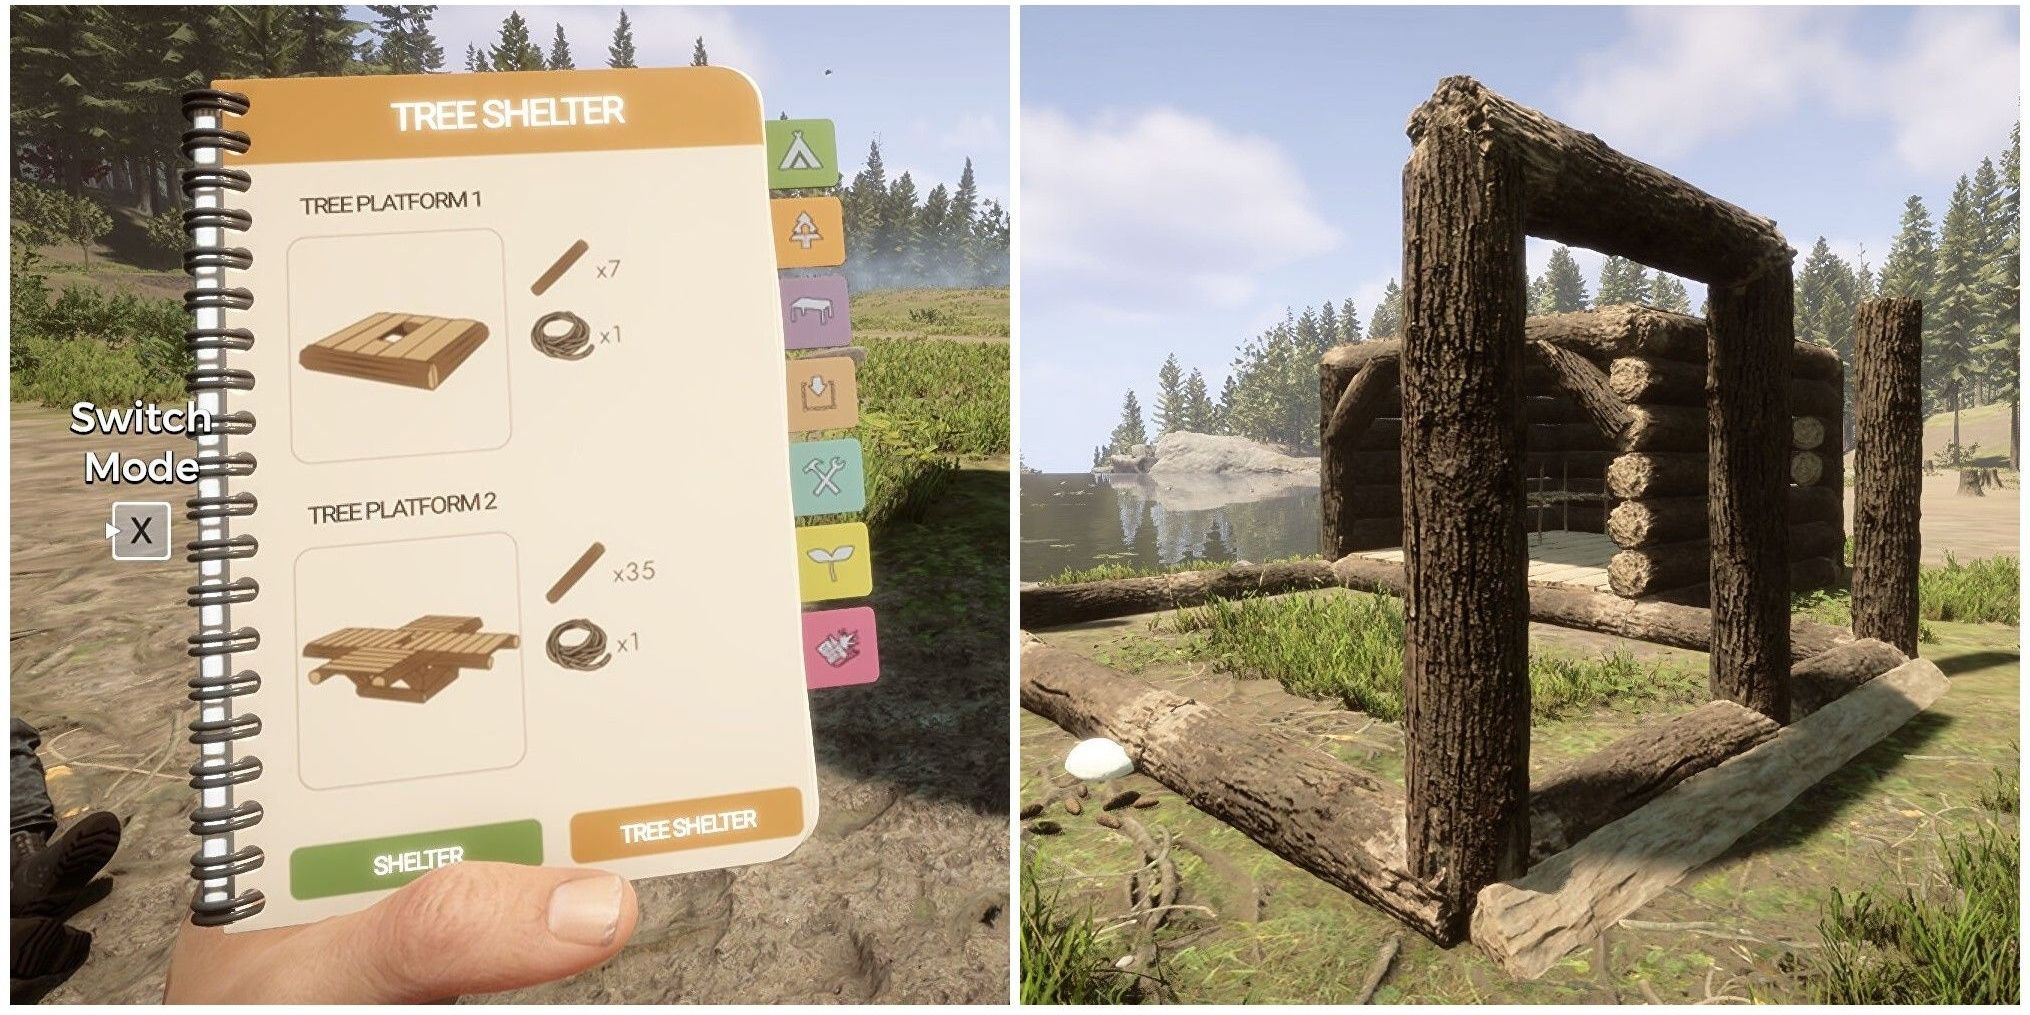 Can you mark your house in Sons of the Forest?